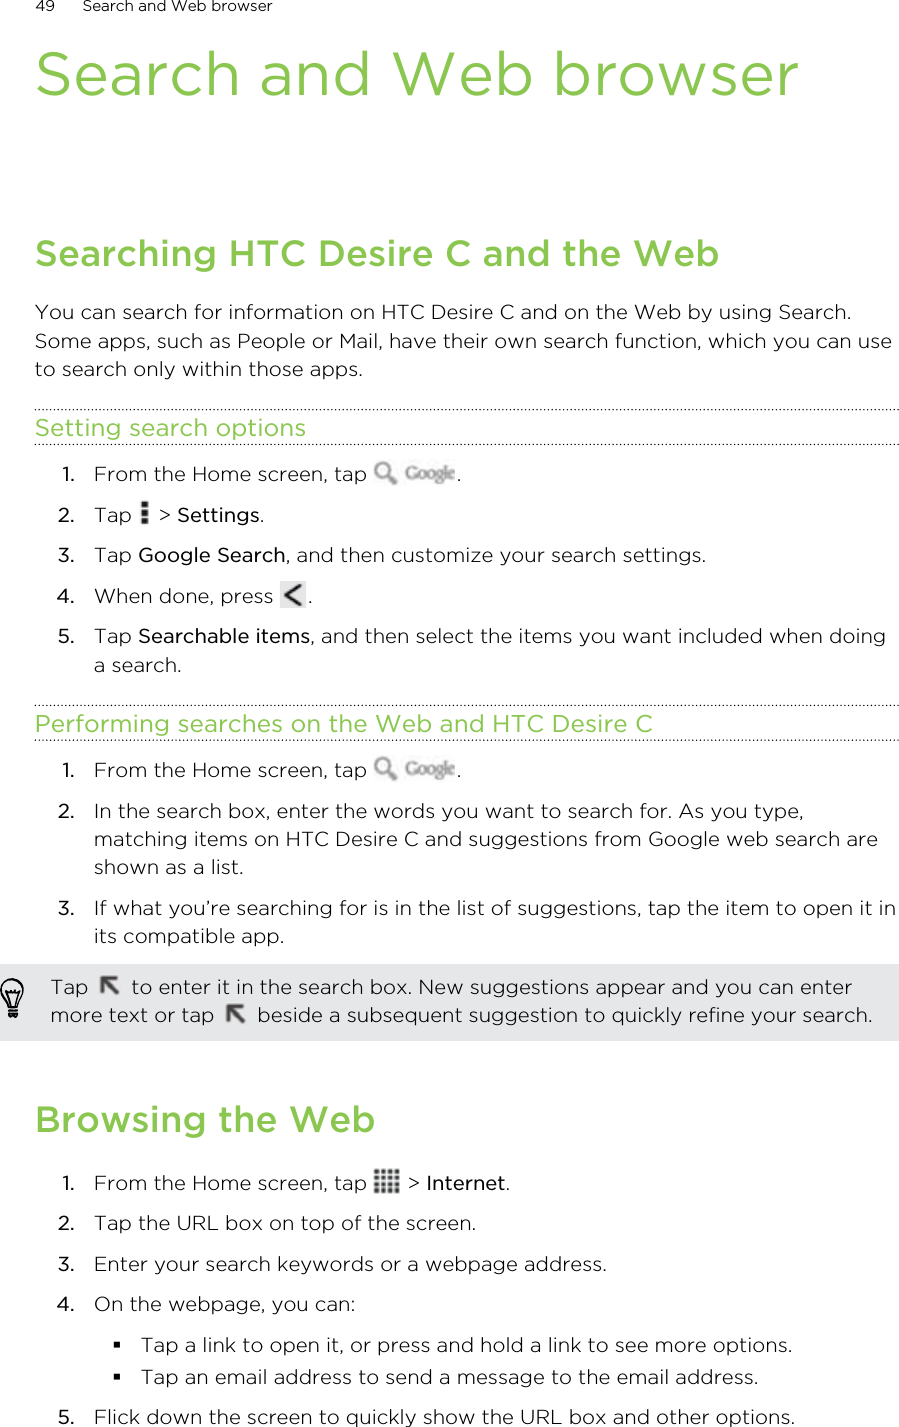 Search and Web browserSearching HTC Desire C and the WebYou can search for information on HTC Desire C and on the Web by using Search.Some apps, such as People or Mail, have their own search function, which you can useto search only within those apps.Setting search options1. From the Home screen, tap  .2. Tap   &gt; Settings.3. Tap Google Search, and then customize your search settings.4. When done, press  .5. Tap Searchable items, and then select the items you want included when doinga search.Performing searches on the Web and HTC Desire C1. From the Home screen, tap  .2. In the search box, enter the words you want to search for. As you type,matching items on HTC Desire C and suggestions from Google web search areshown as a list.3. If what you’re searching for is in the list of suggestions, tap the item to open it inits compatible app. Tap   to enter it in the search box. New suggestions appear and you can entermore text or tap   beside a subsequent suggestion to quickly refine your search.Browsing the Web1. From the Home screen, tap   &gt; Internet.2. Tap the URL box on top of the screen.3. Enter your search keywords or a webpage address.4. On the webpage, you can:Tap a link to open it, or press and hold a link to see more options.Tap an email address to send a message to the email address.5. Flick down the screen to quickly show the URL box and other options.49 Search and Web browser